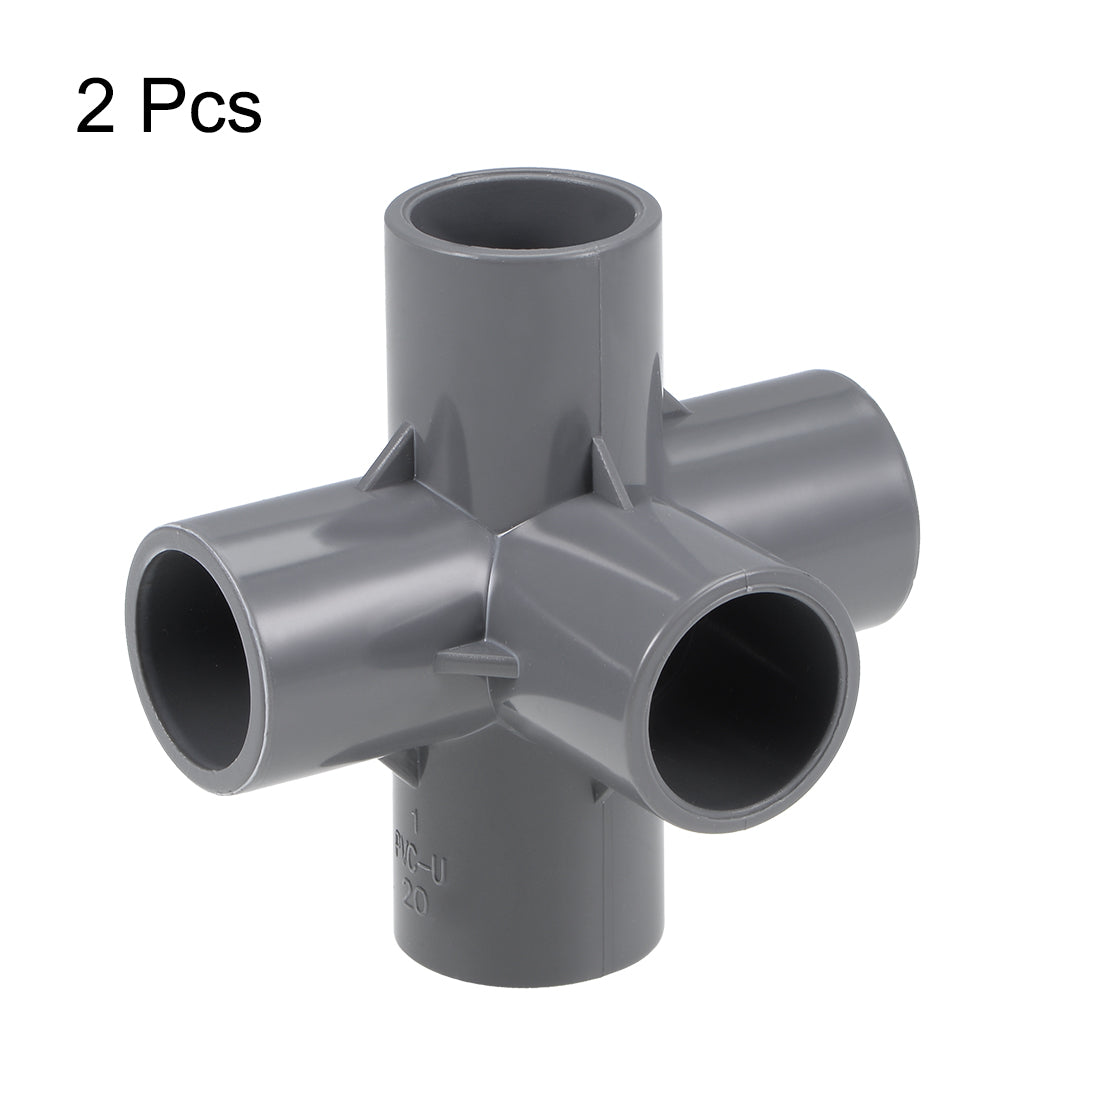 uxcell Uxcell 5 Way 20mm Tee Metric PVC Fitting Elbow - PVC Furniture Elbow Fittings Gray 2Pcs